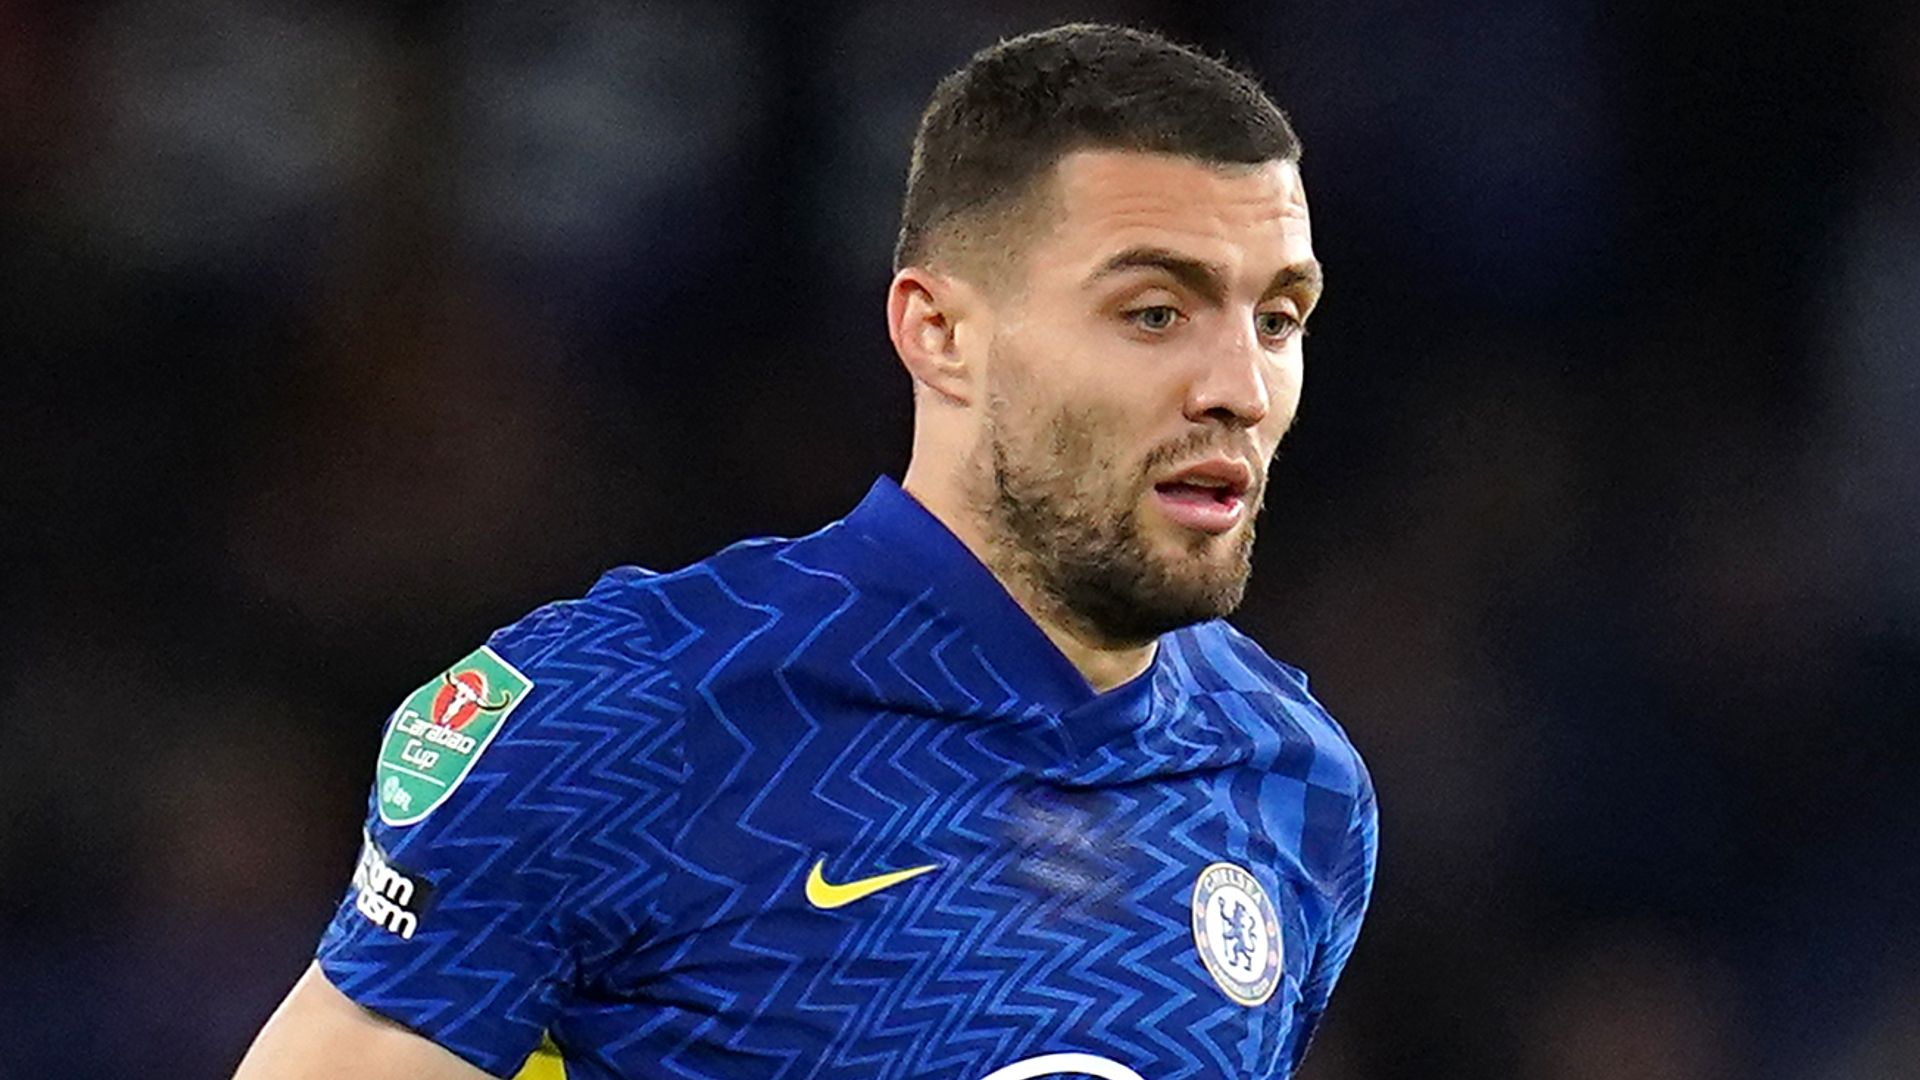 Chelsea suffer blow as Kovacic faces 'weeks' out with injury